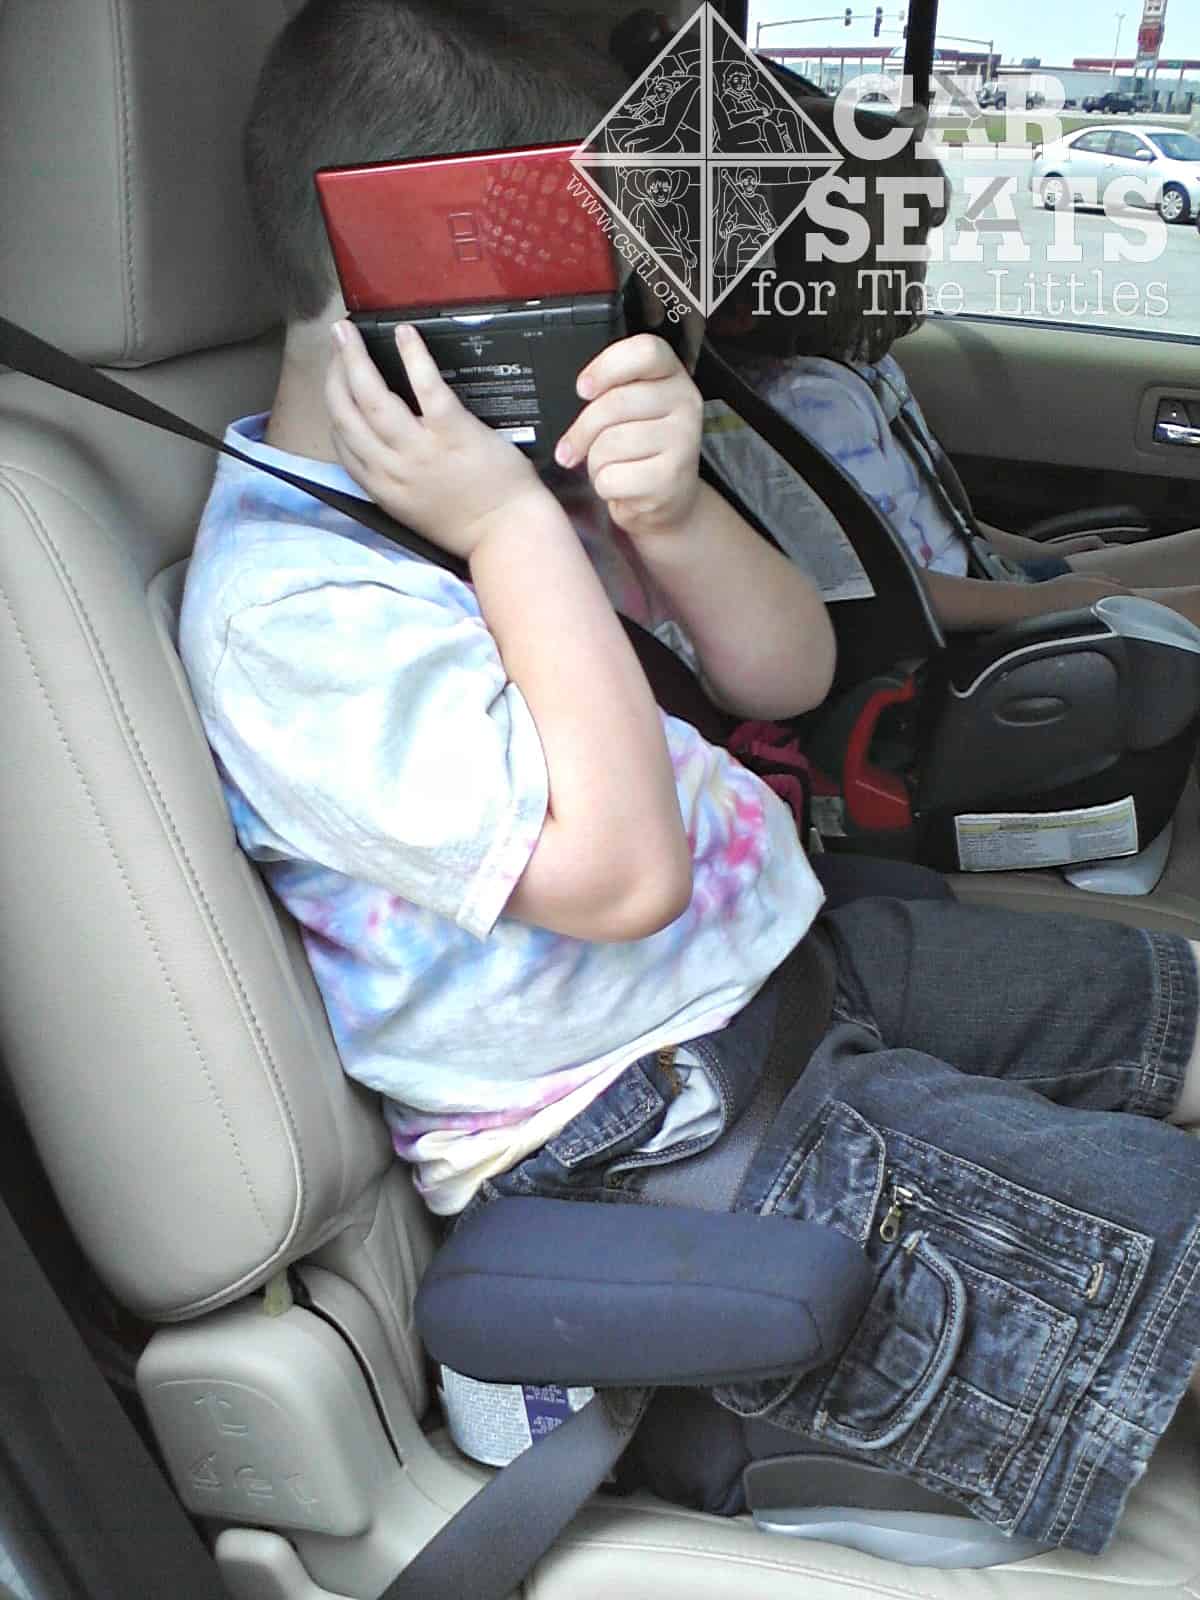 Child Booster Seats: A Boost of Safety 